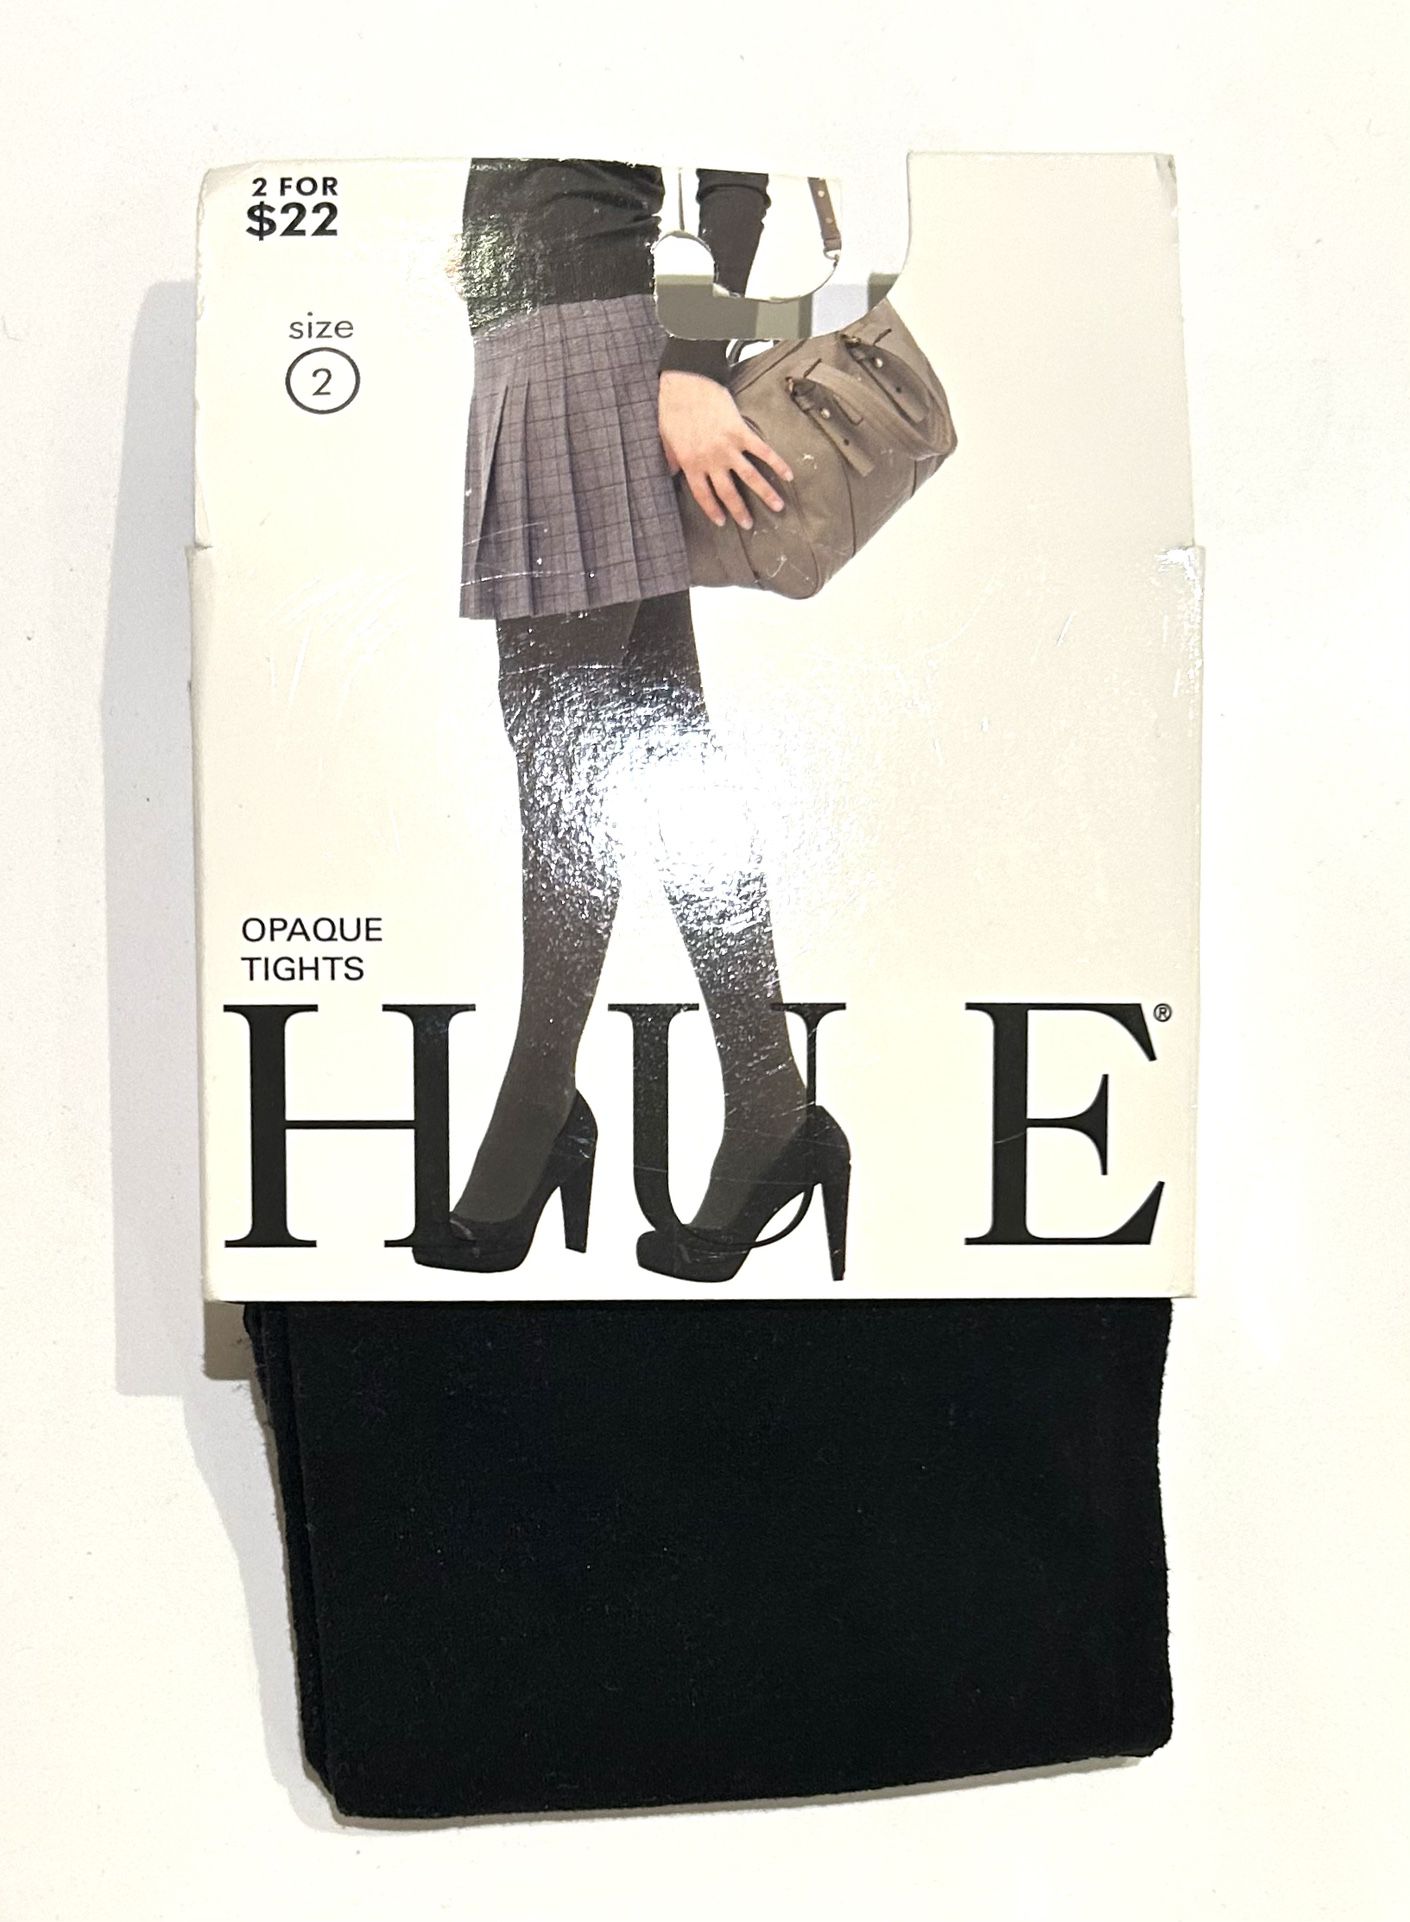 NEW! NWT Women's Hue Opaque Tights 1 Pair Size 2 Black #4689